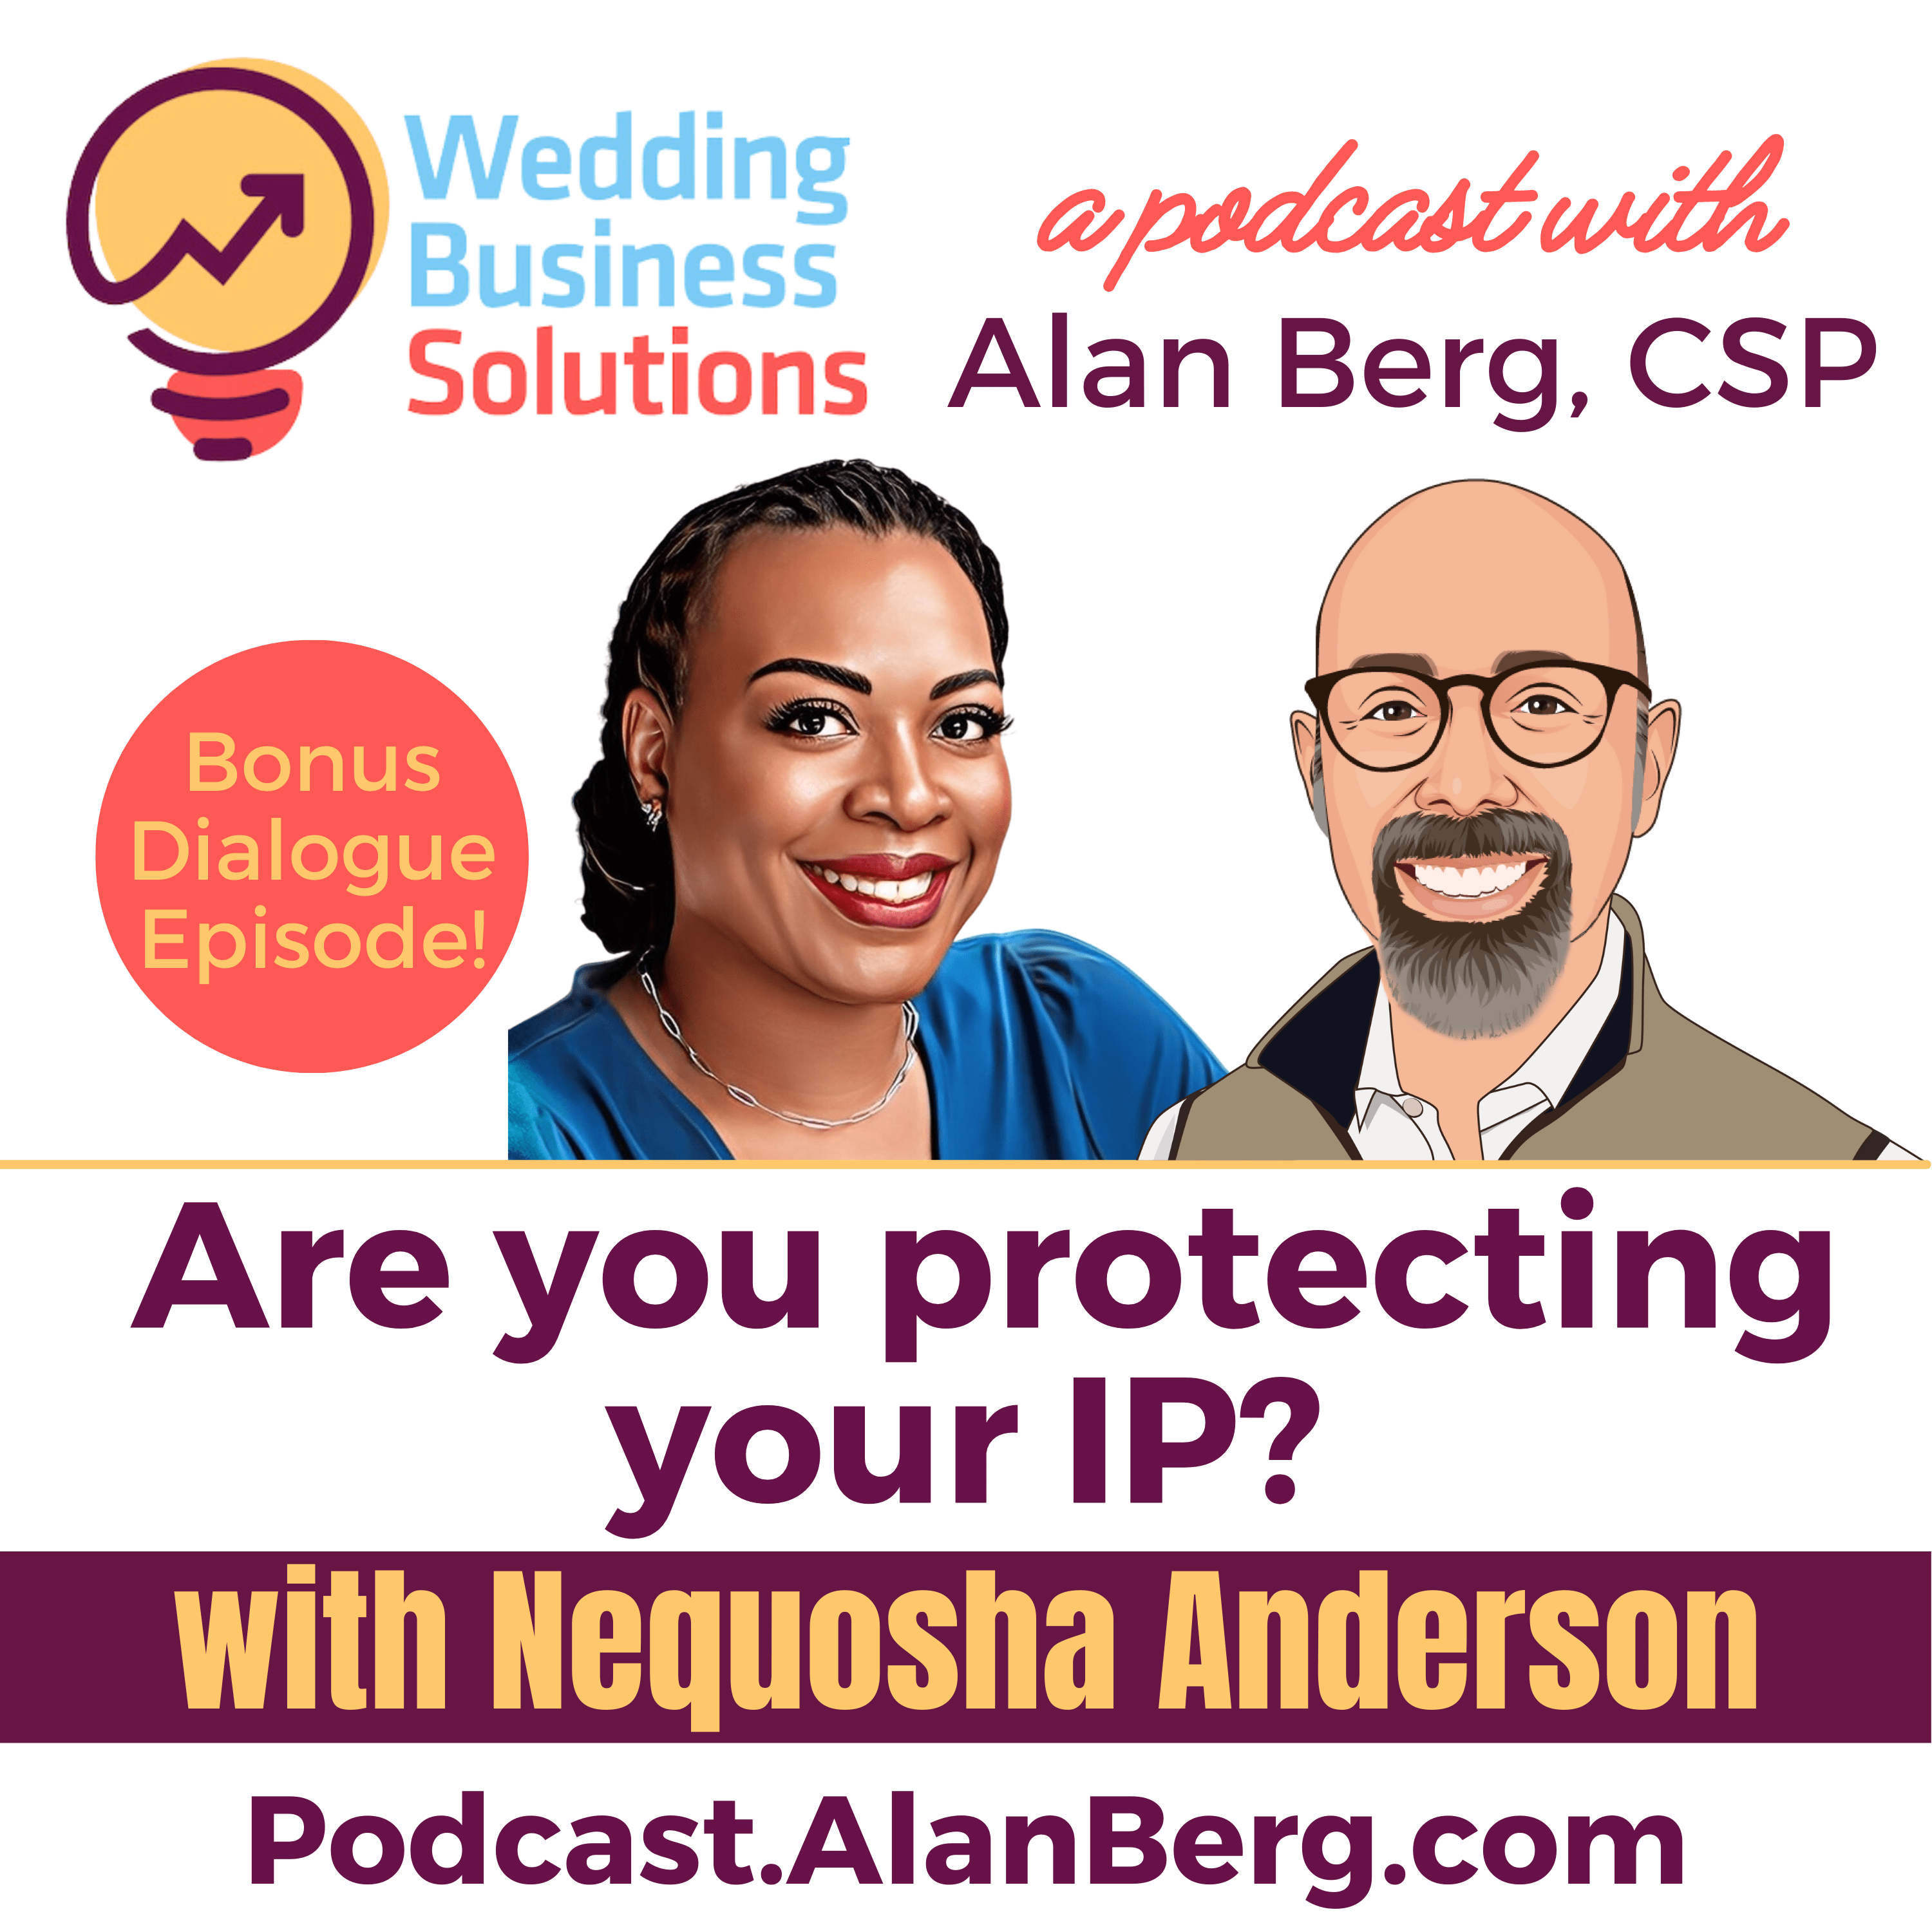 Nequosha Anderson – Are you protecting your IP? – Podcast Transcript